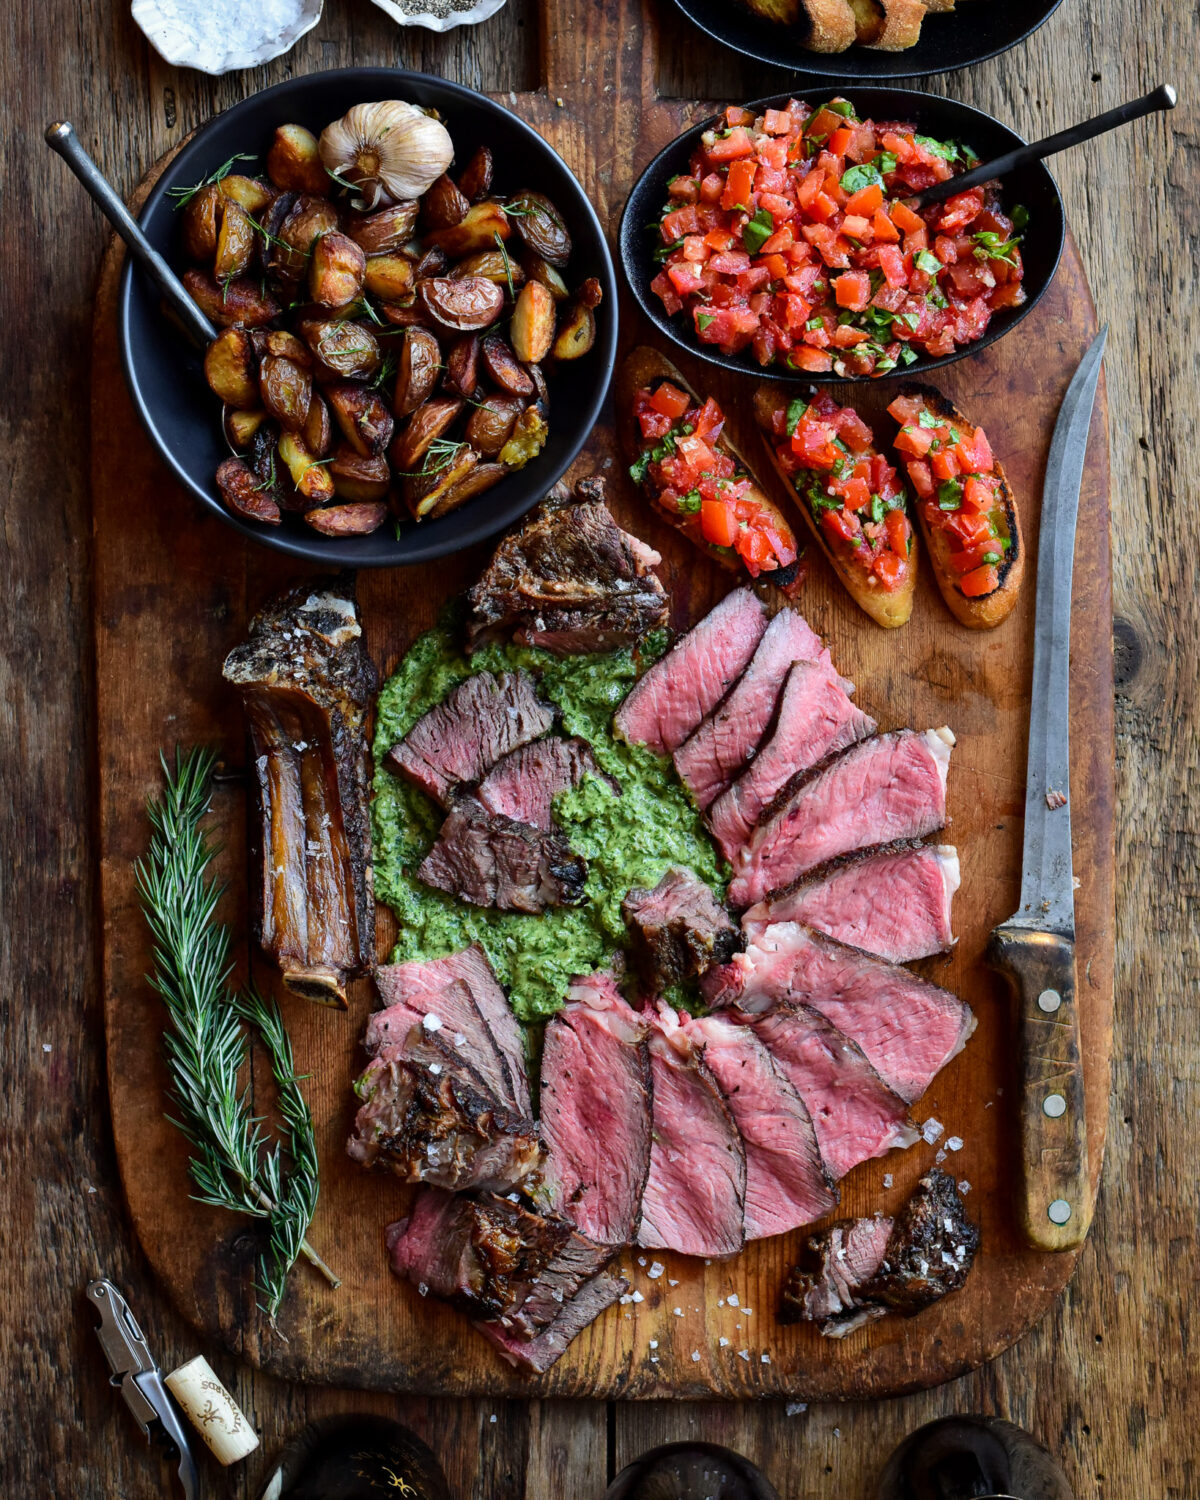 Florentine-Style Steak served with salsa verde, crispy potatoes (cooked in the beef fat trimmings) and bruschetta.